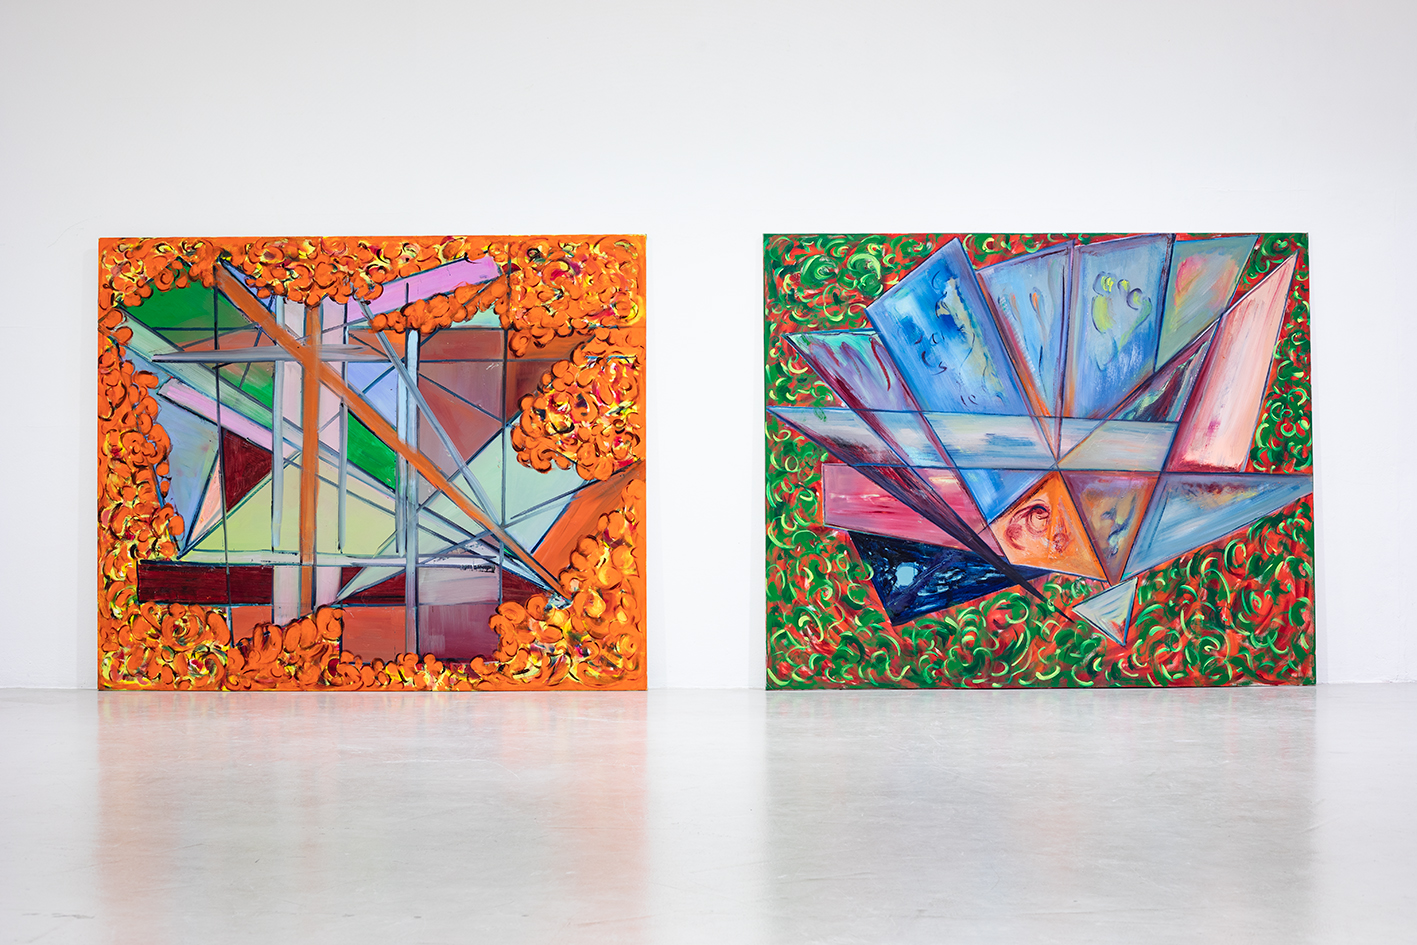 Ulrike Münchhoff, oilpaintings series, 2021–2022 Harmony of the female spirit, Installationview, with 2-3 parts, dimensions variable, in front: 1,90 x 2,10 m, oil on canvas,